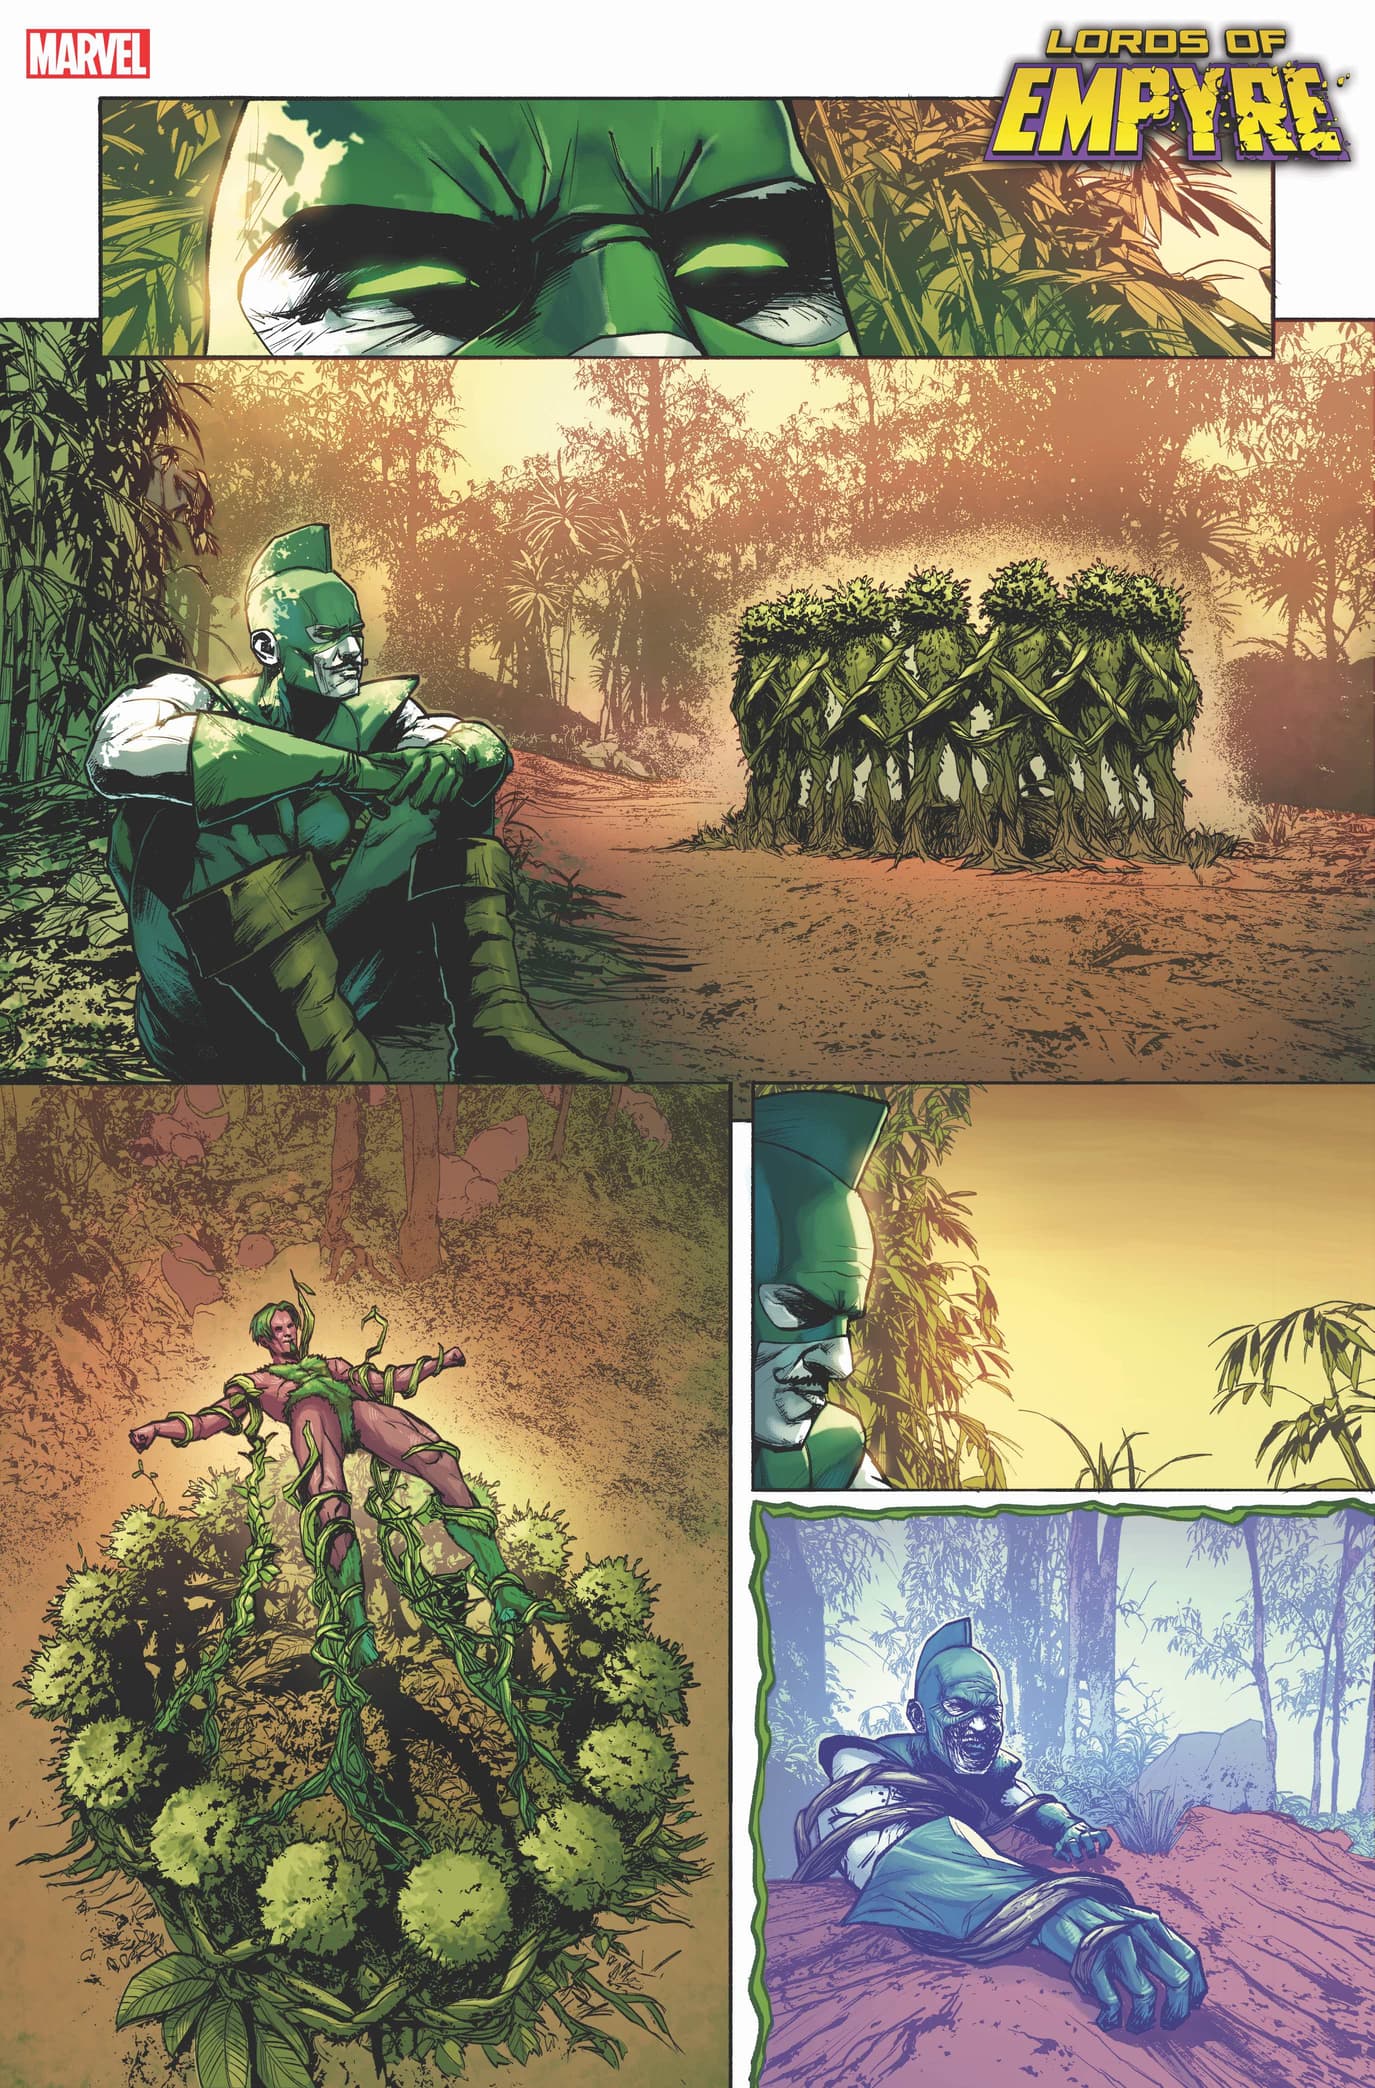 LORDS OF EMPYRE: SWORDSMAN #1 preview interiors by Thomas Nachlik with colors by Marcio Menyz